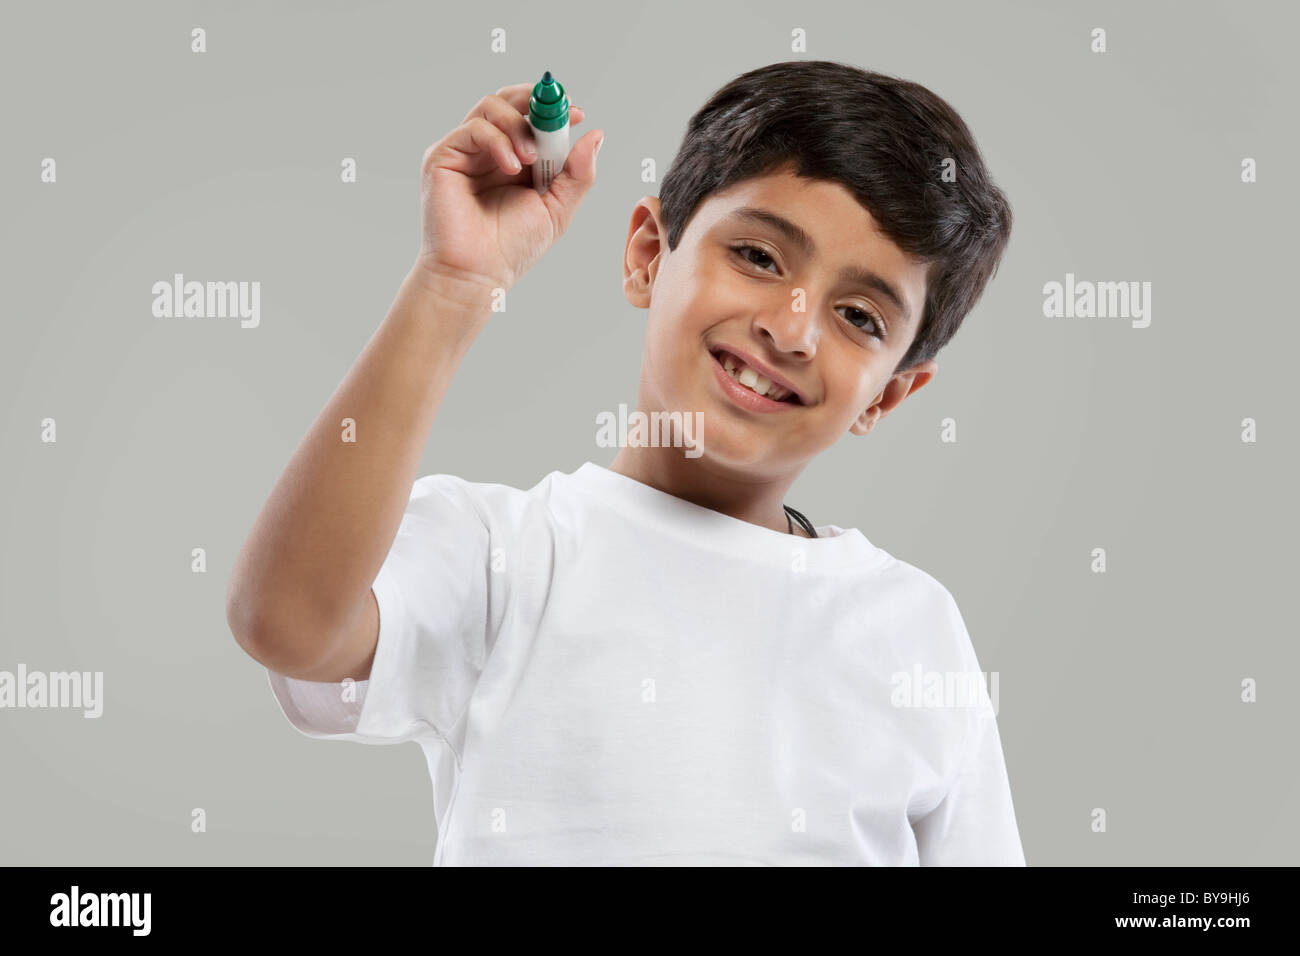 Young boy holding a marker pen Stock Photo